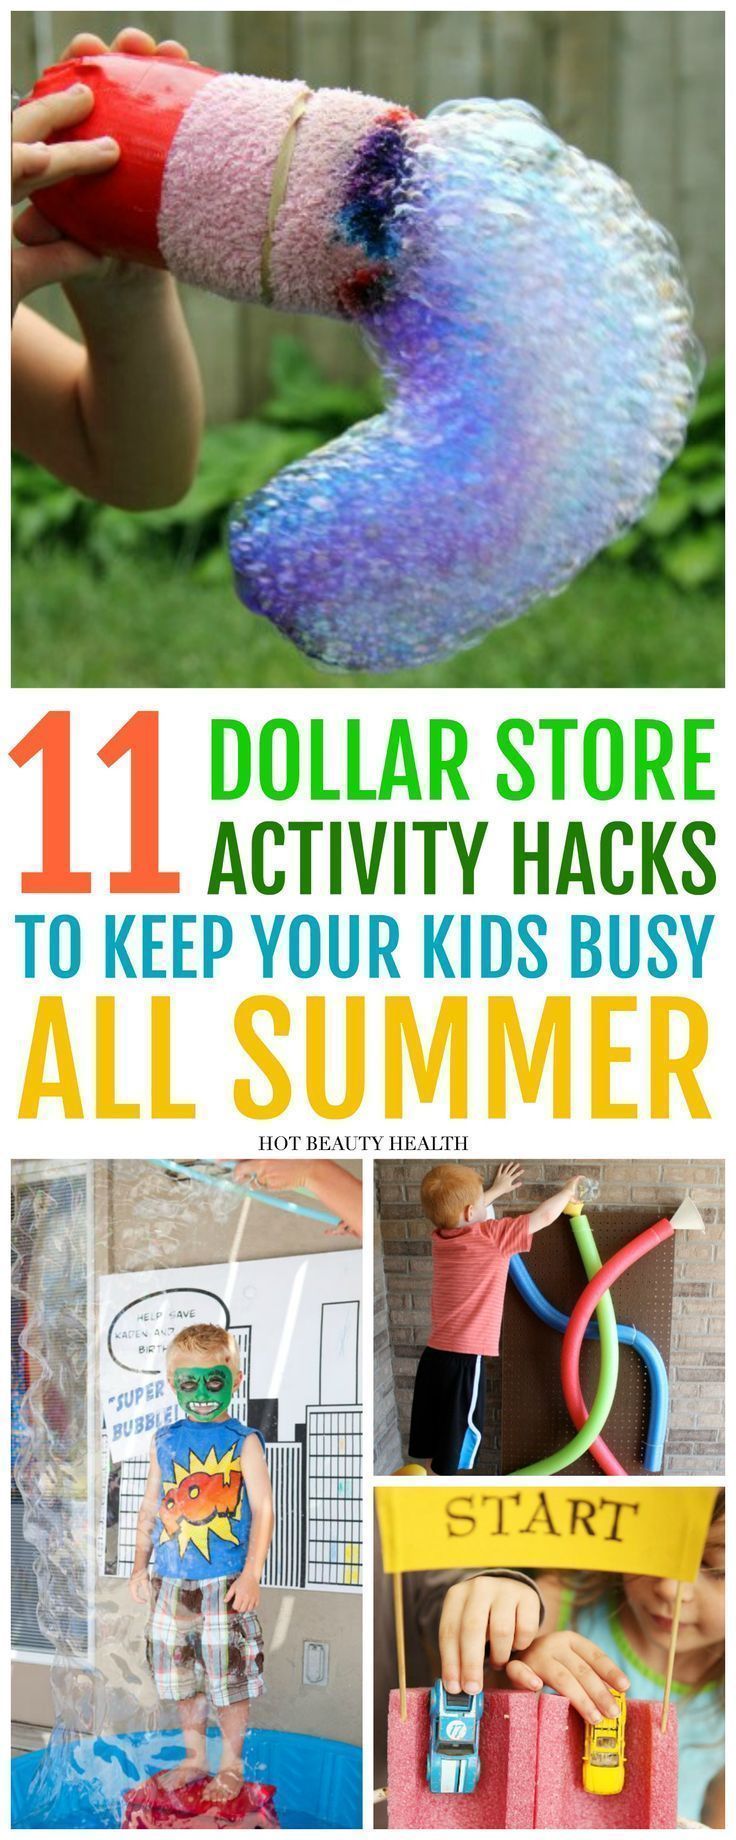 11 Fun Activities to DIY This Summer From The Dollar Store - Hot Beauty Health -   16 diy projects Dollar Store kids ideas